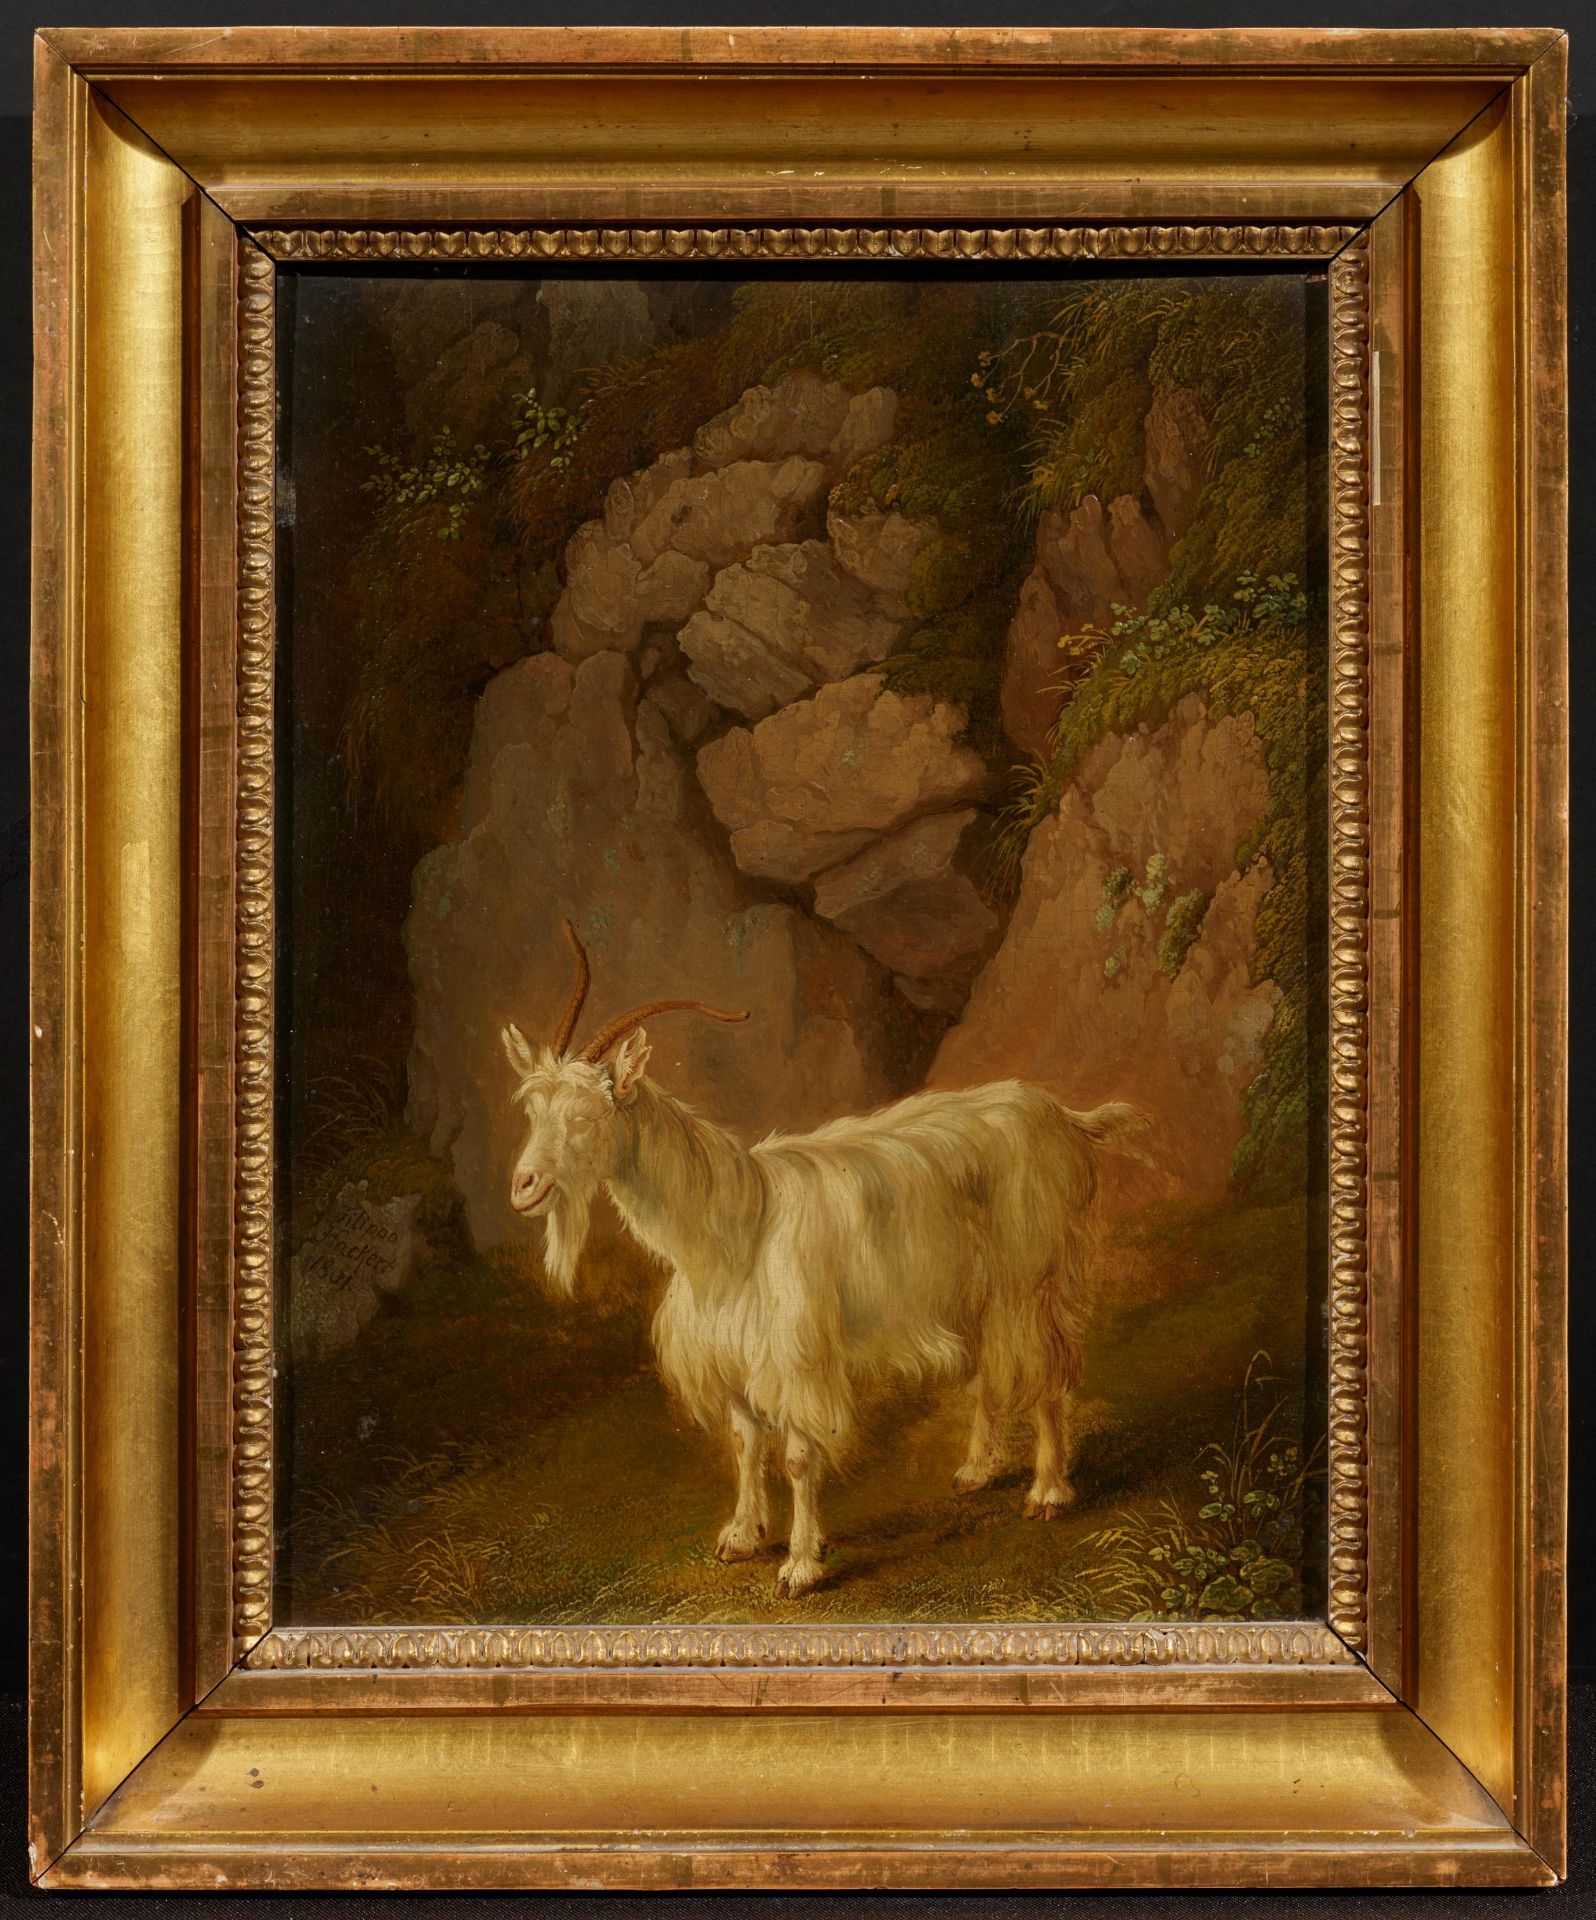 Jakob Philipp Hackert: Goat in front of Cliffs - Image 2 of 4